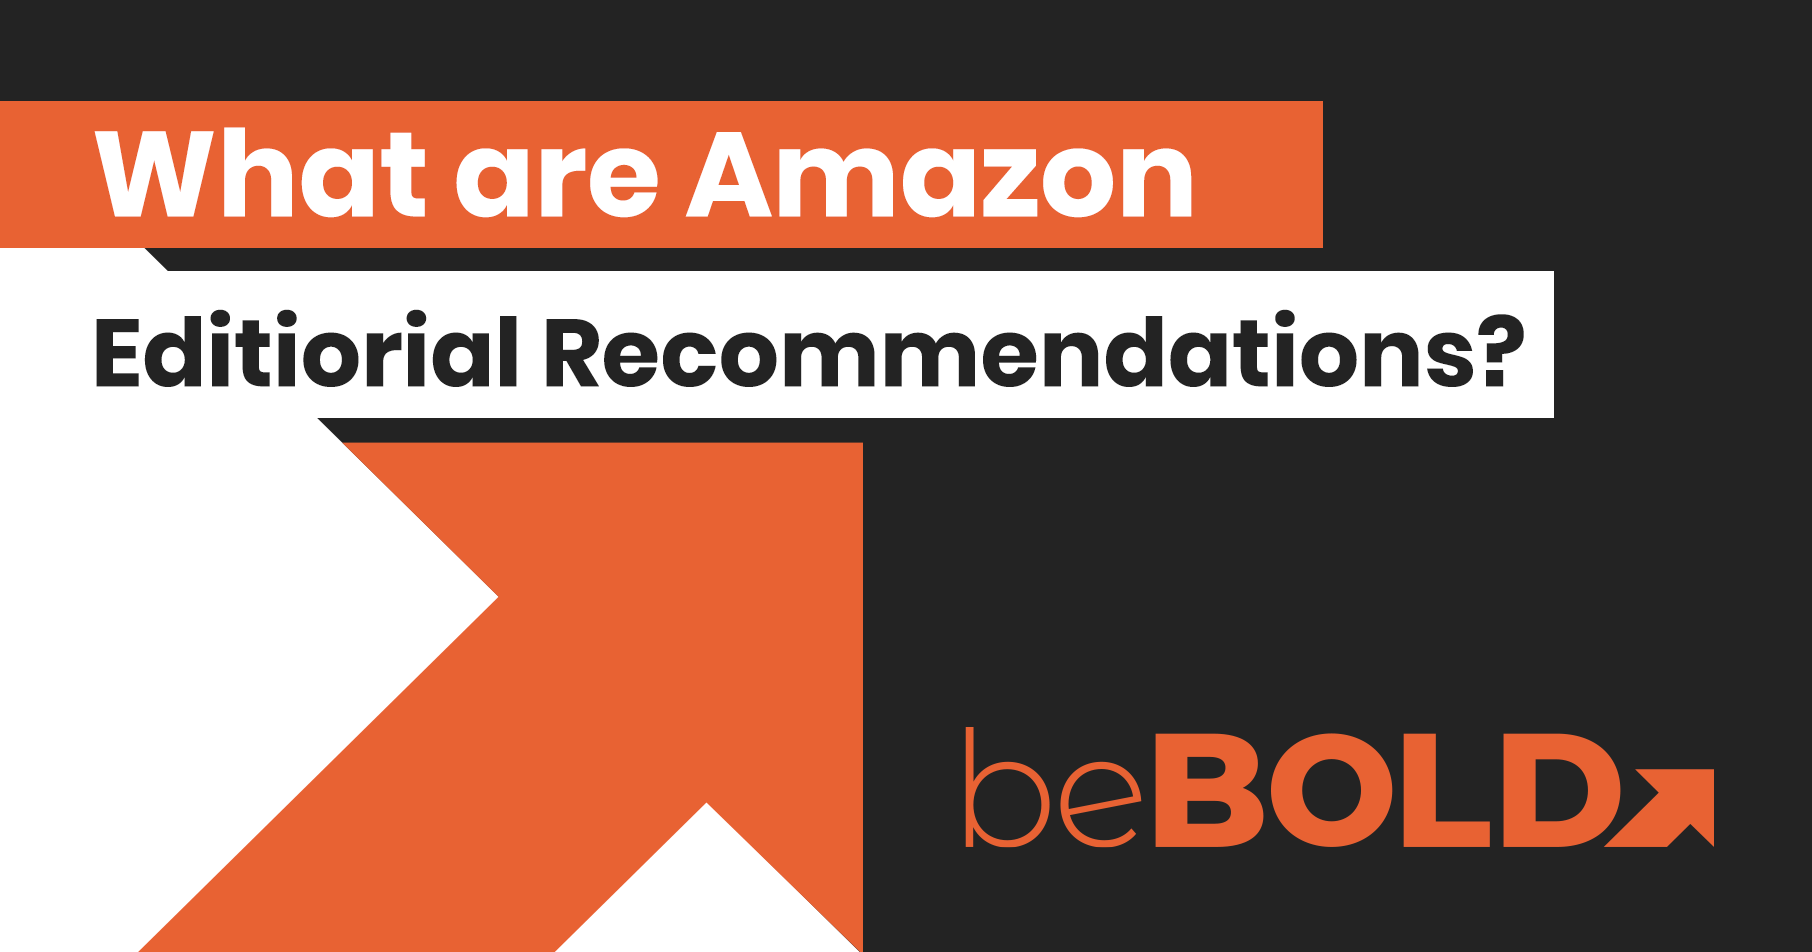 What Are Amazon Editorial Recommendations?